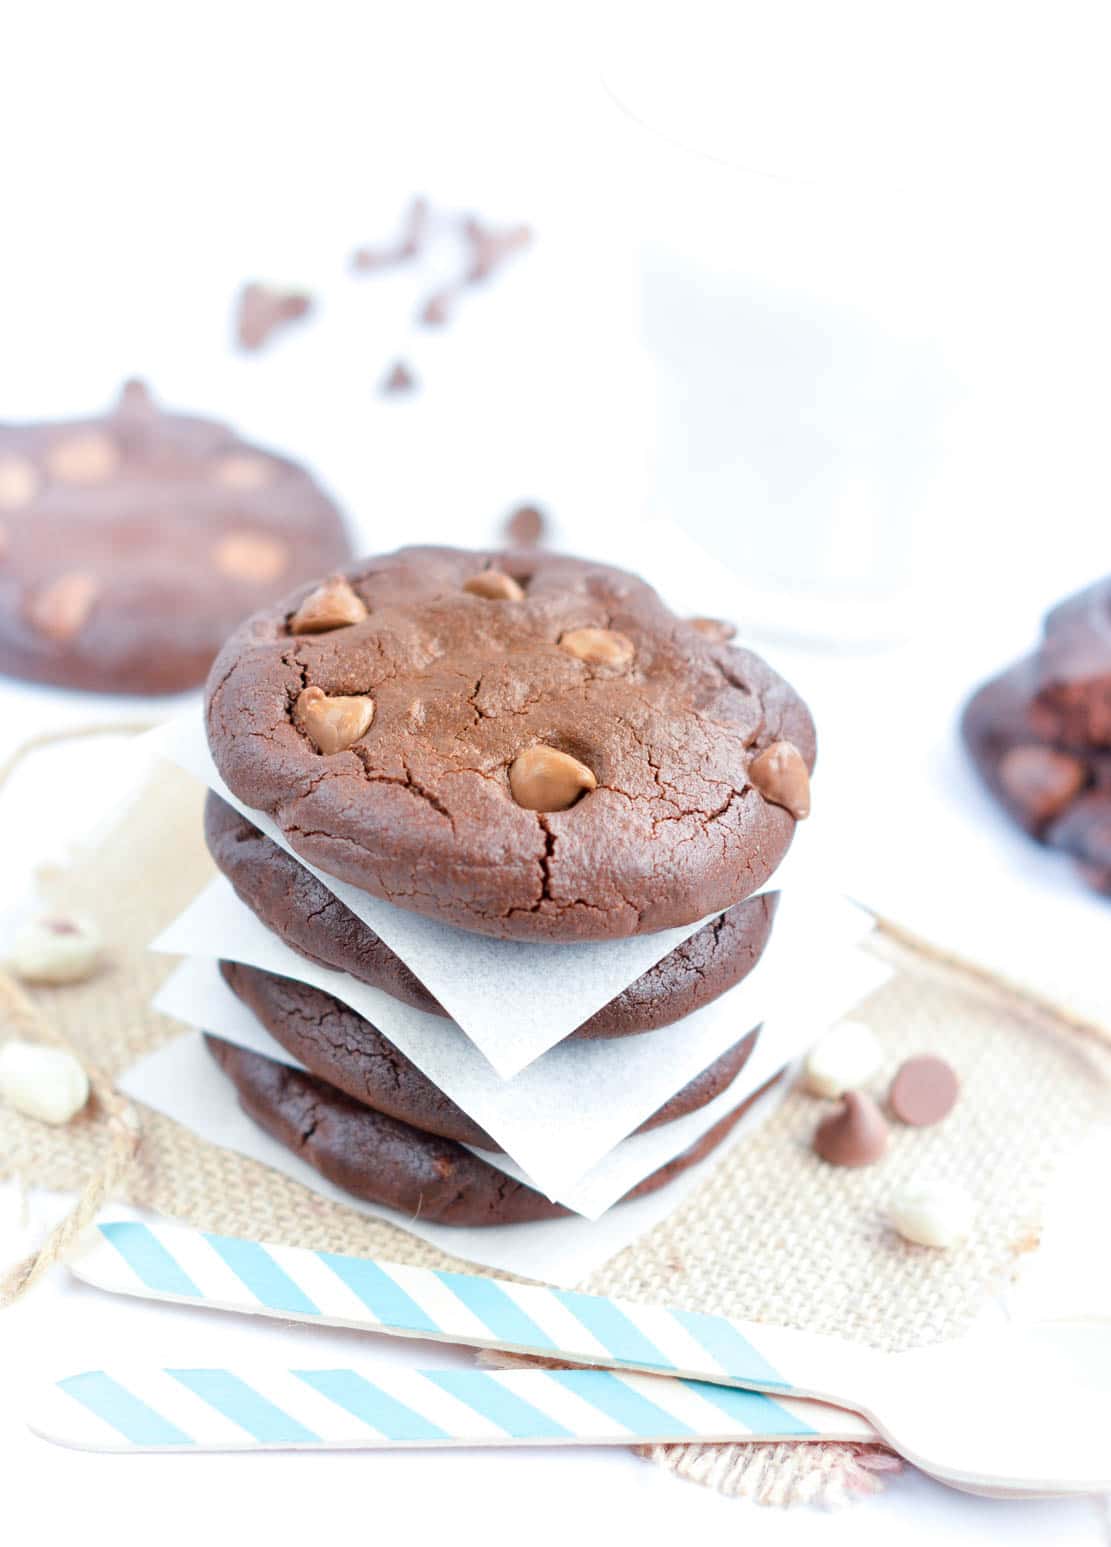 flourless chocolate peanut butter cookies s with chocolate chips. NO refined ingredients, Flourless, No Sugar, easy 6 ingredients recipe to whip in 5 minutes. Grain free, gluten free and dairy free.